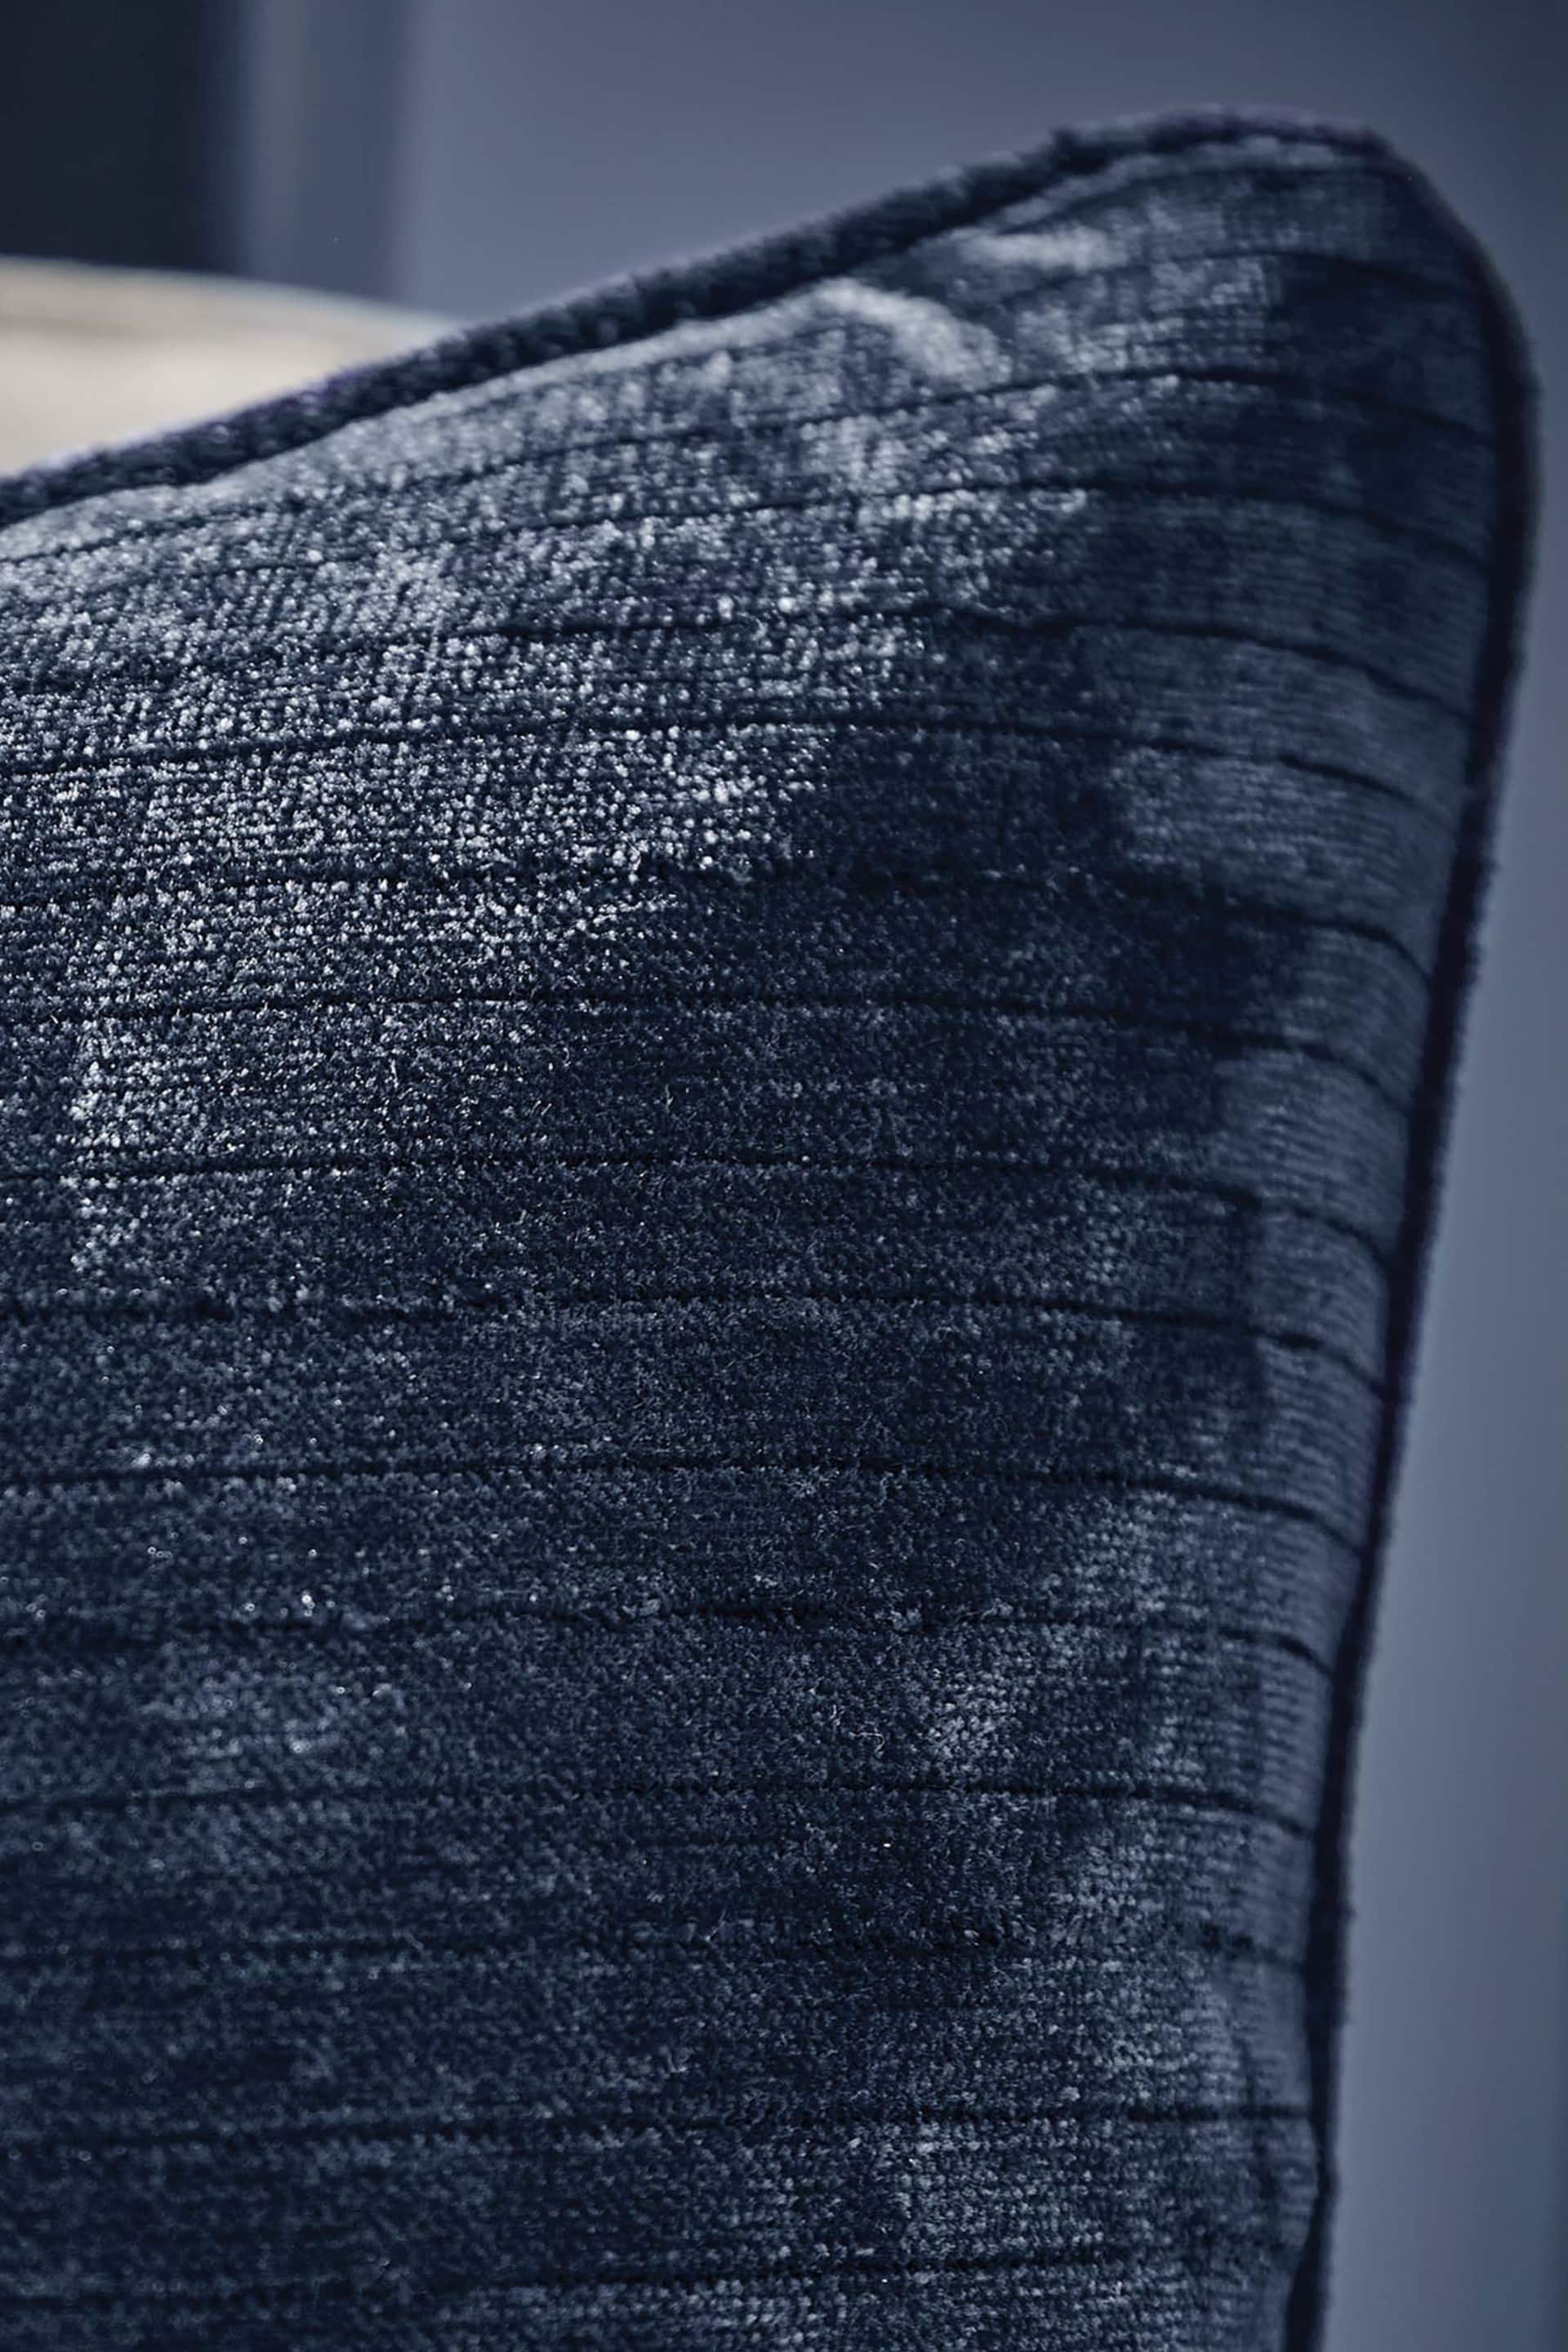 Hyperion Deep Navy Selene Luxury Chenille Piped Cushion - Image 2 of 3